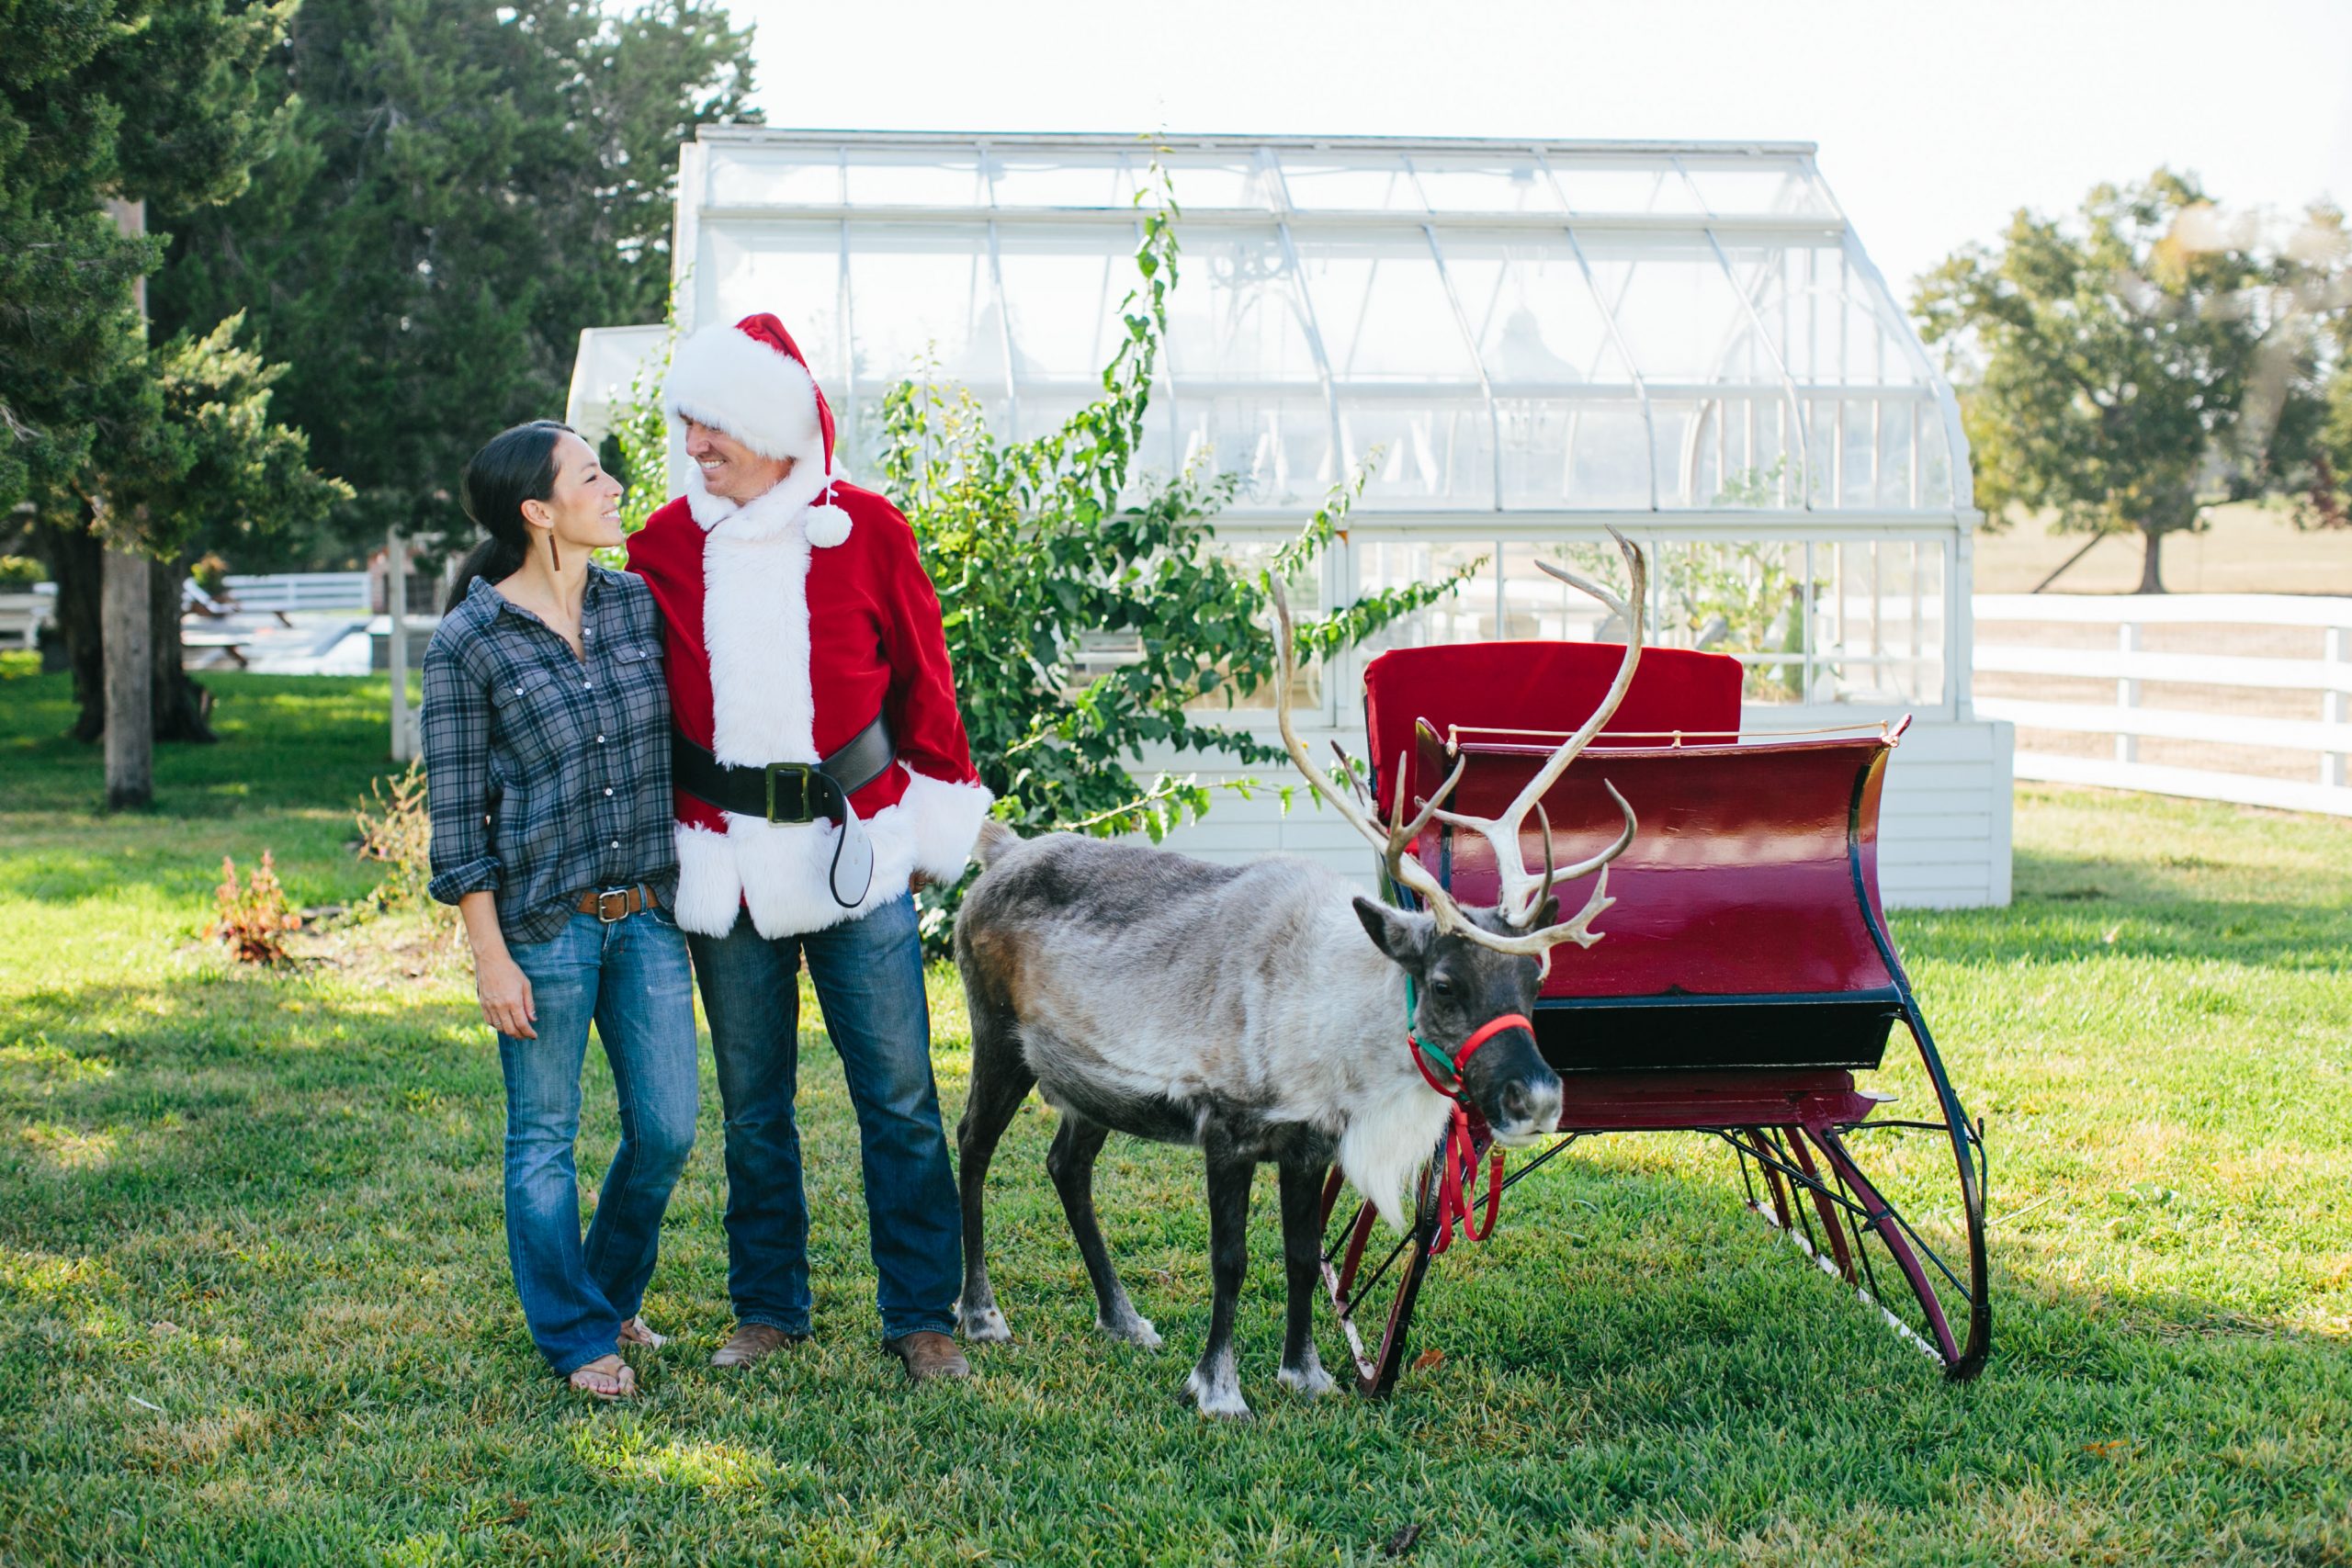 Chip and Joanna Gaines pose with a Reindeer and a holiday sleigh for Christmas.